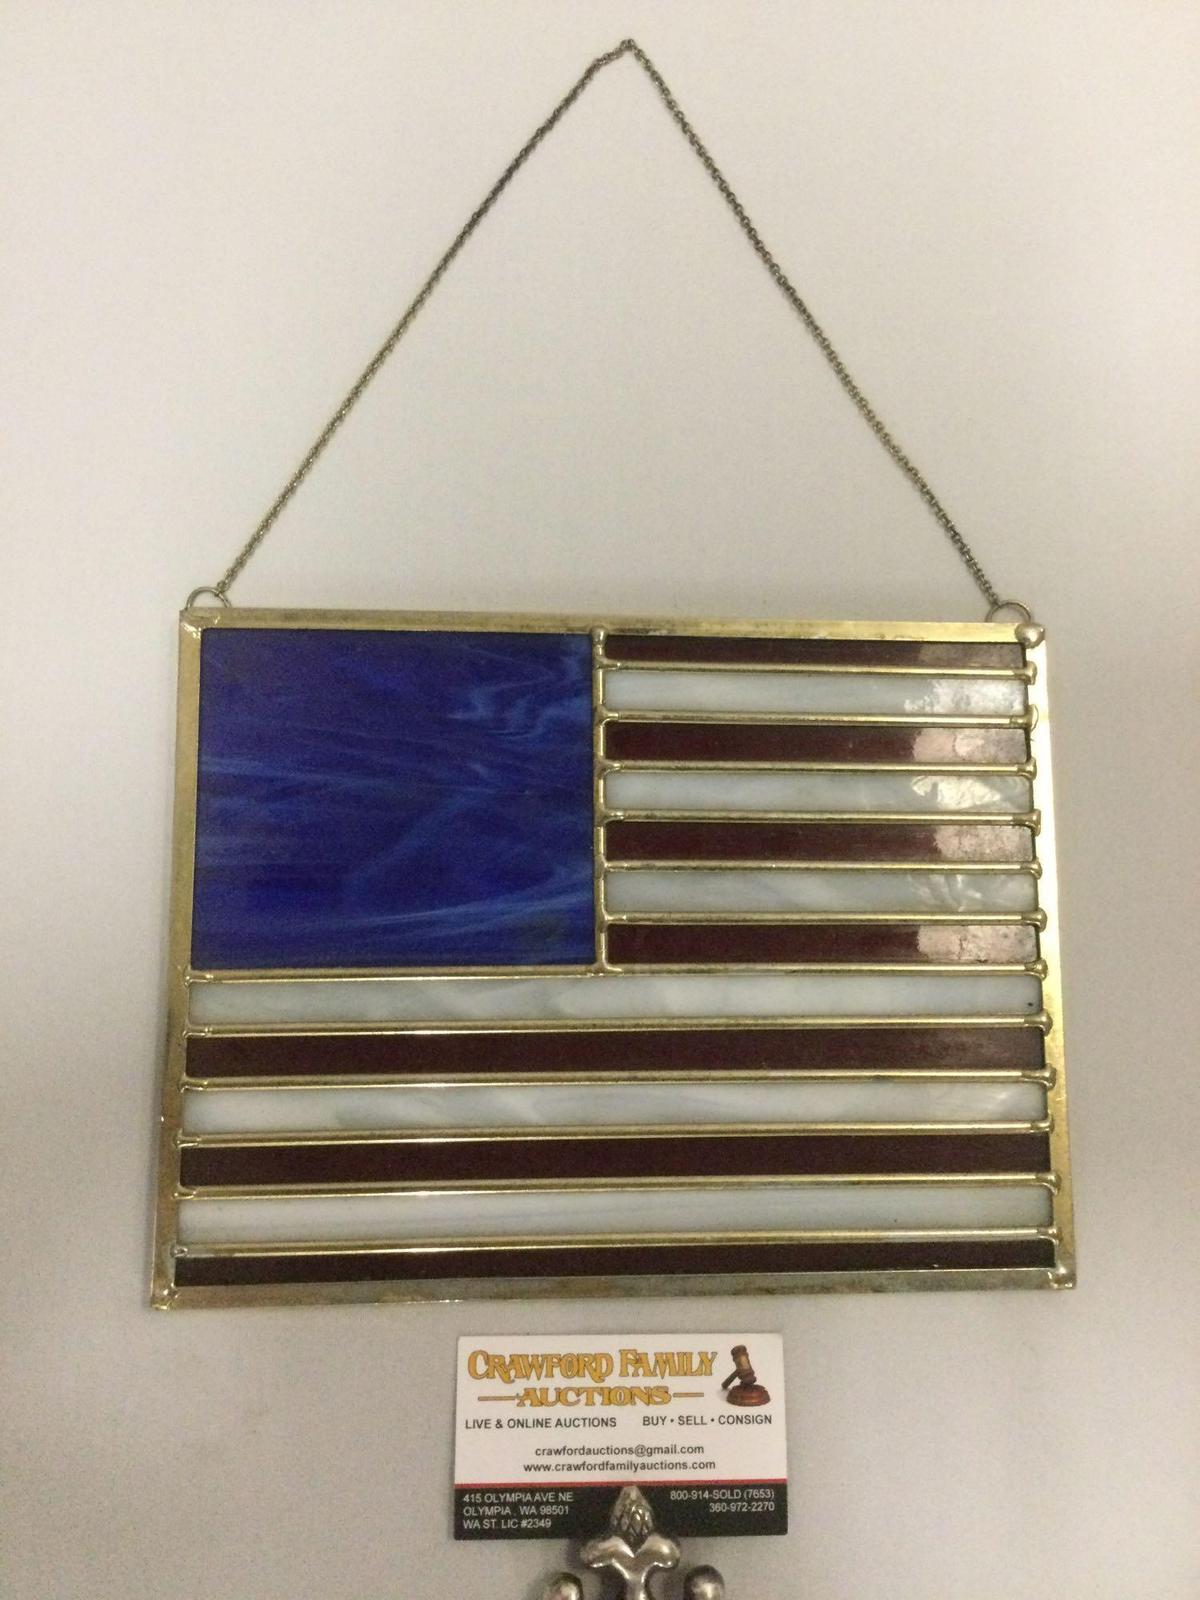 Vintage stained glass hanging art piece in the style of US American flag, approx 10 x 7.5 in.